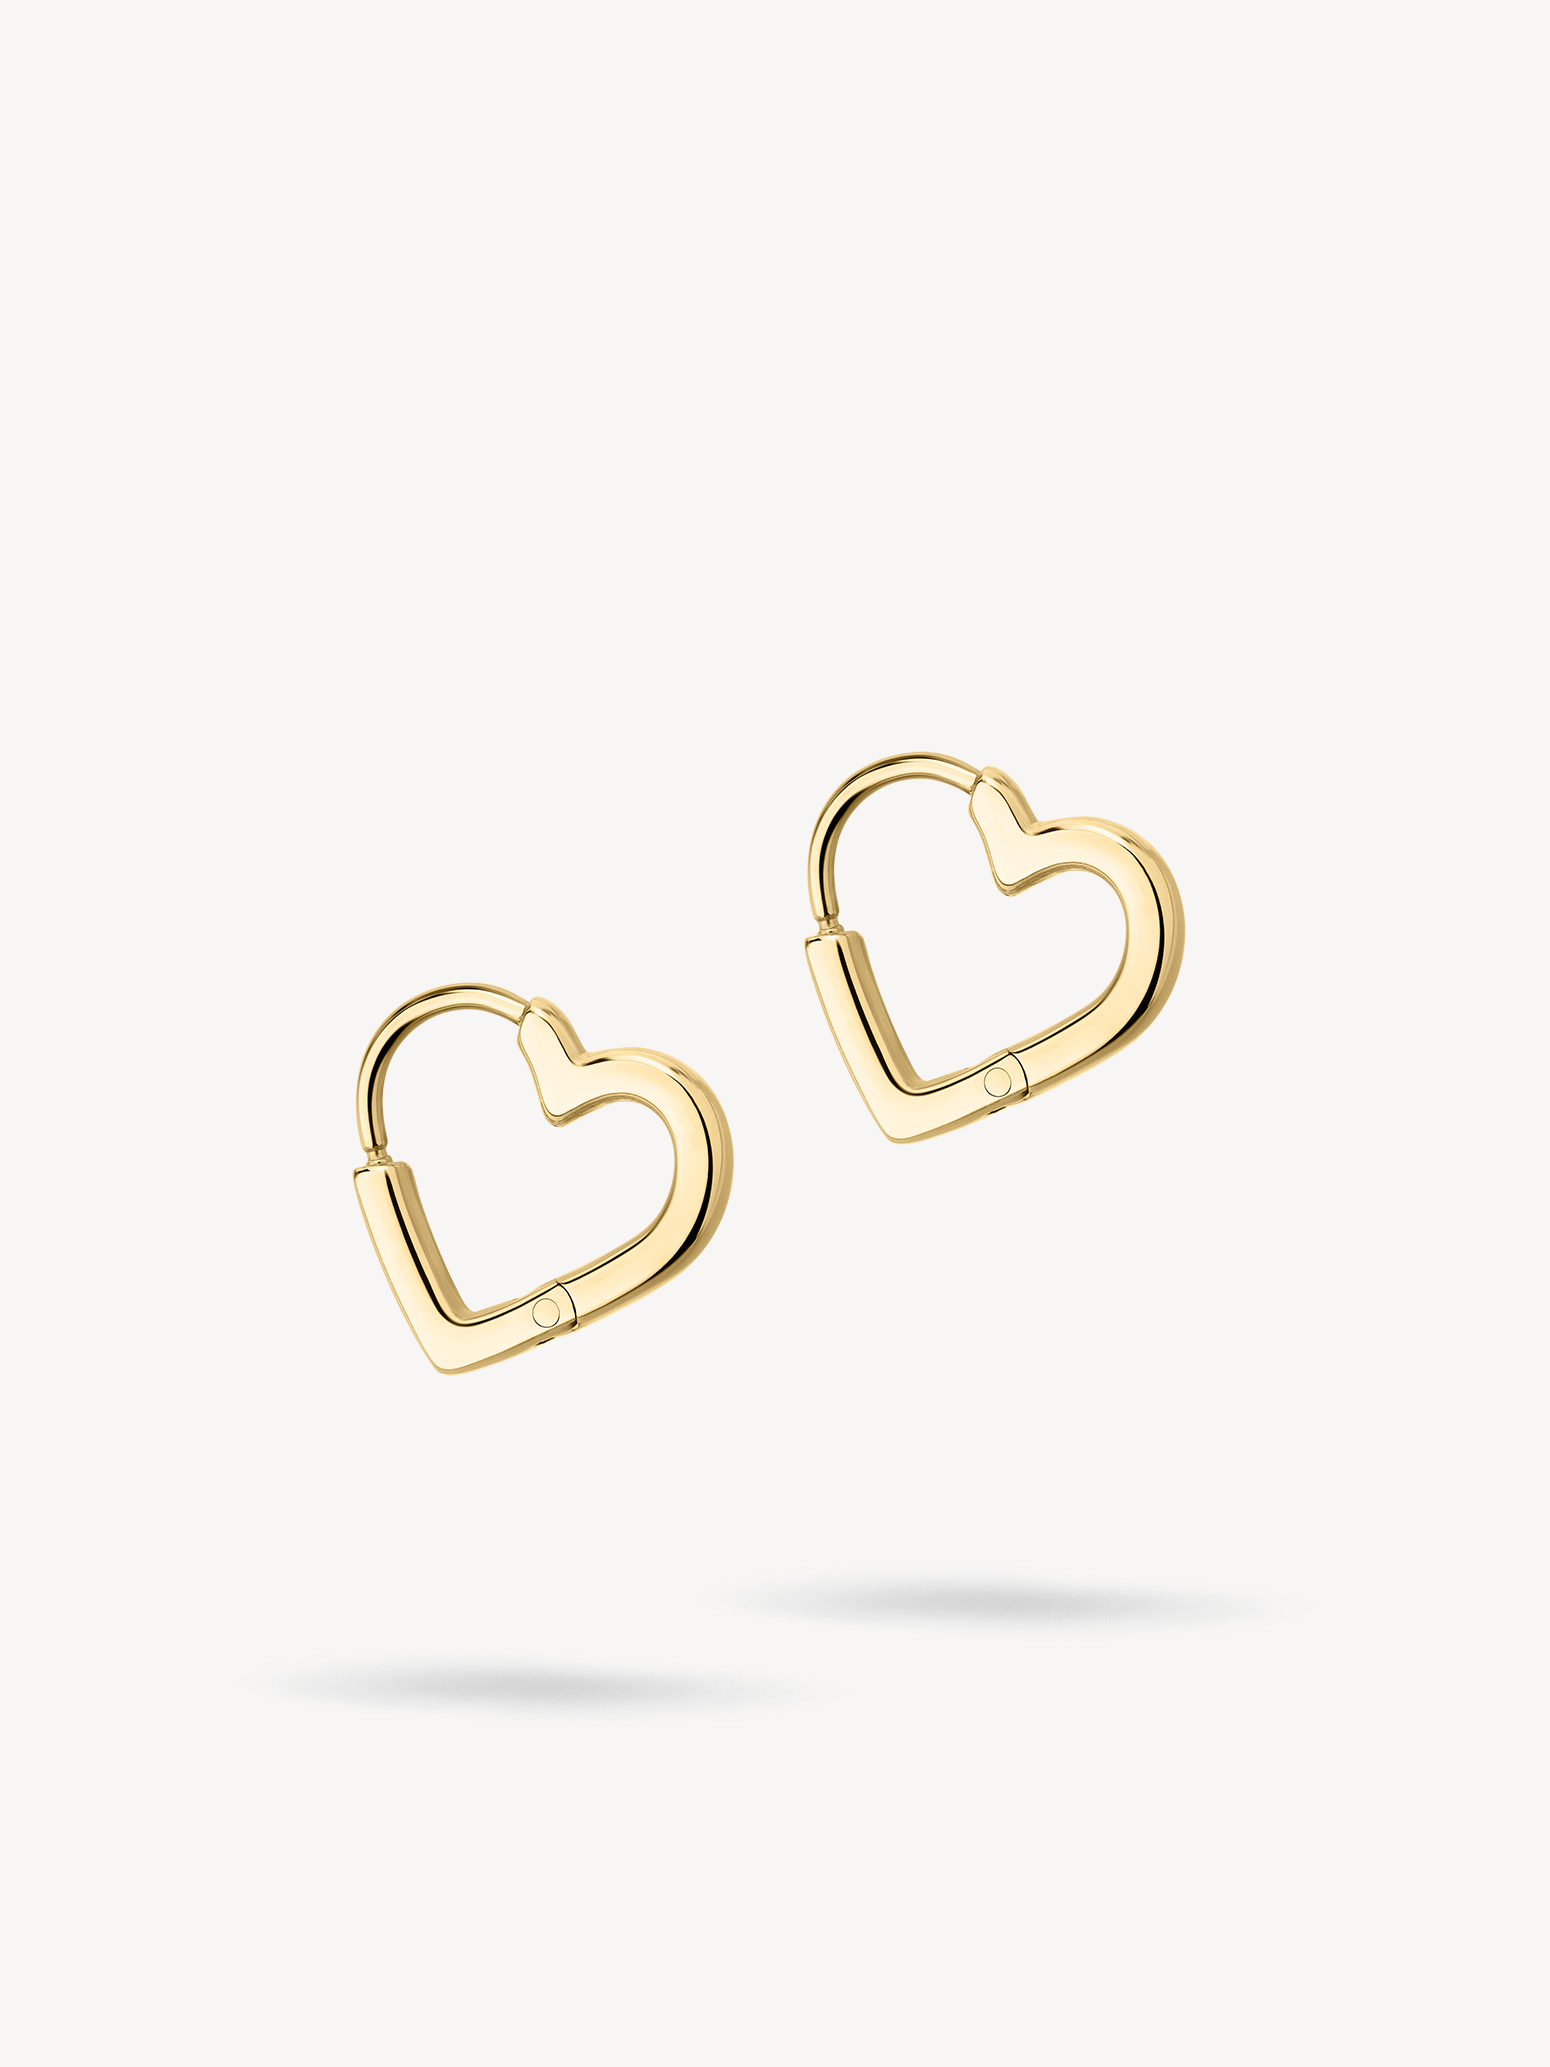 ﻿Creole earring - gold